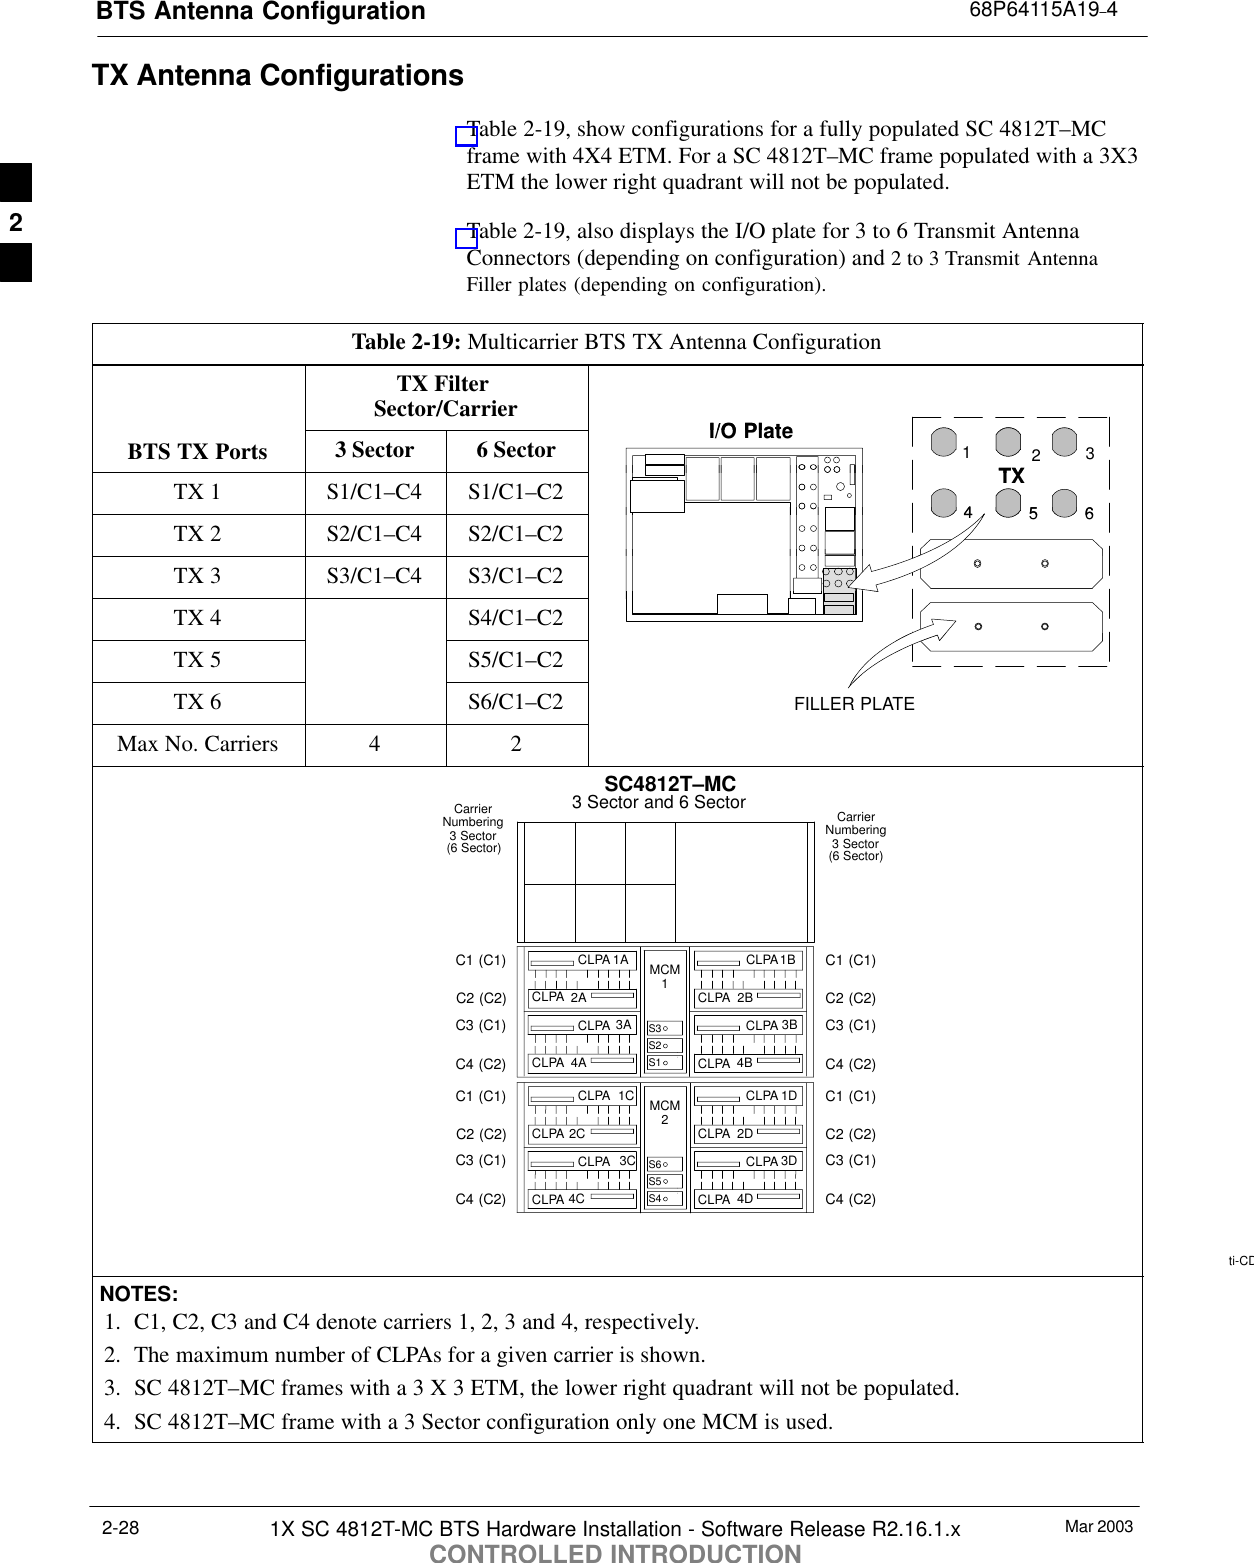 BTS Antenna Configuration 68P64115A19–4Mar 20031X SC 4812T-MC BTS Hardware Installation - Software Release R2.16.1.xCONTROLLED INTRODUCTION2-28TX Antenna ConfigurationsTable 2-19, show configurations for a fully populated SC 4812T–MCframe with 4X4 ETM. For a SC 4812T–MC frame populated with a 3X3ETM the lower right quadrant will not be populated.Table 2-19, also displays the I/O plate for 3 to 6 Transmit AntennaConnectors (depending on configuration) and 2 to 3 Transmit AntennaFiller plates (depending on configuration).Table 2-19: Multicarrier BTS TX Antenna ConfigurationTX Filter Sector/CarrierI/O PlateBTS TX Ports 3 Sector 6 Sector I/O Plate 123TXTX 1 S1/C1–C4 S1/C1–C2456TXTX 2 S2/C1–C4 S2/C1–C2456TX 3 S3/C1–C4 S3/C1–C2 789TX 4 S4/C1–C2TX 5 S5/C1–C2TX 6 S6/C1–C2 FILLER PLATEMax No. Carriers 4 2ti-CD 1C 2C 3C 4C 1D 2D 3D 4D 3A 2A 1A  1B 2B 3B 4BC1 (C1)C2 (C2)C3 (C1)C4 (C2)C1 (C1)C2 (C2)C3 (C1)C4 (C2)C1 (C1)C2 (C2)C3 (C1)C4 (C2)C1 (C1)C2 (C2)C3 (C1)C4 (C2) 4AS4MCM1SC4812T–MCCarrierNumbering CarrierNumbering3 Sector and 6 Sector3 Sector(6 Sector)3 Sector(6 Sector)S5S6S1S2S3MCM2CLPACLPACLPACLPACLPACLPACLPACLPACLPACLPACLPACLPACLPACLPACLPACLPANOTES:1. C1, C2, C3 and C4 denote carriers 1, 2, 3 and 4, respectively.2. The maximum number of CLPAs for a given carrier is shown.3. SC 4812T–MC frames with a 3 X 3 ETM, the lower right quadrant will not be populated.4. SC 4812T–MC frame with a 3 Sector configuration only one MCM is used.2